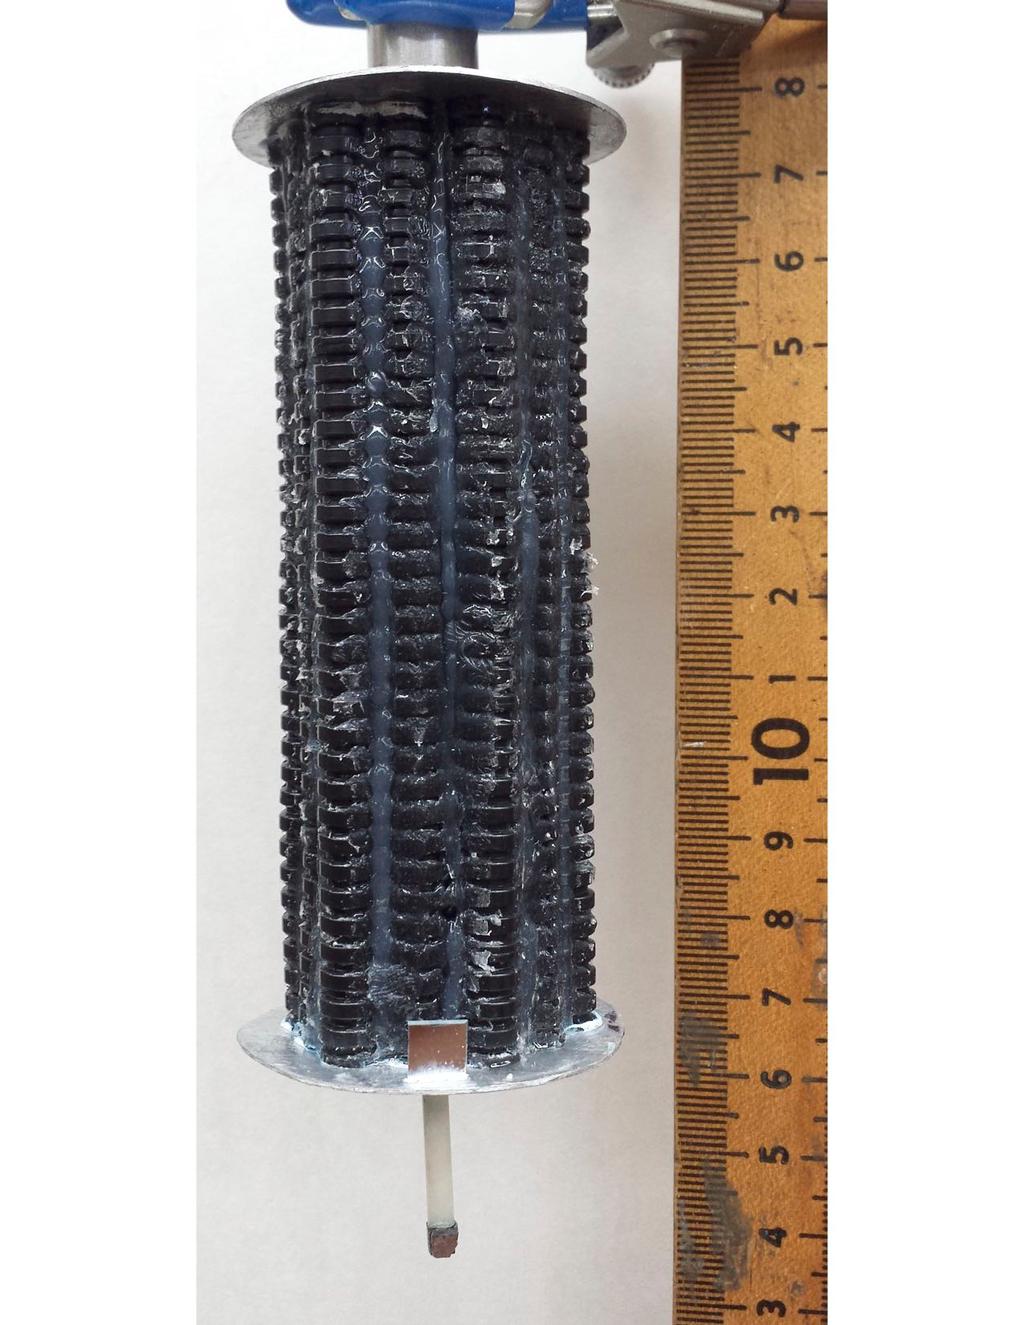 (a) (b) Figure 2: (a) Largest specimen of aligned corrugated tubing and silicone rubber matrix composite. (b) Cross section of largest sample. diameter of an individual corrugated tube.